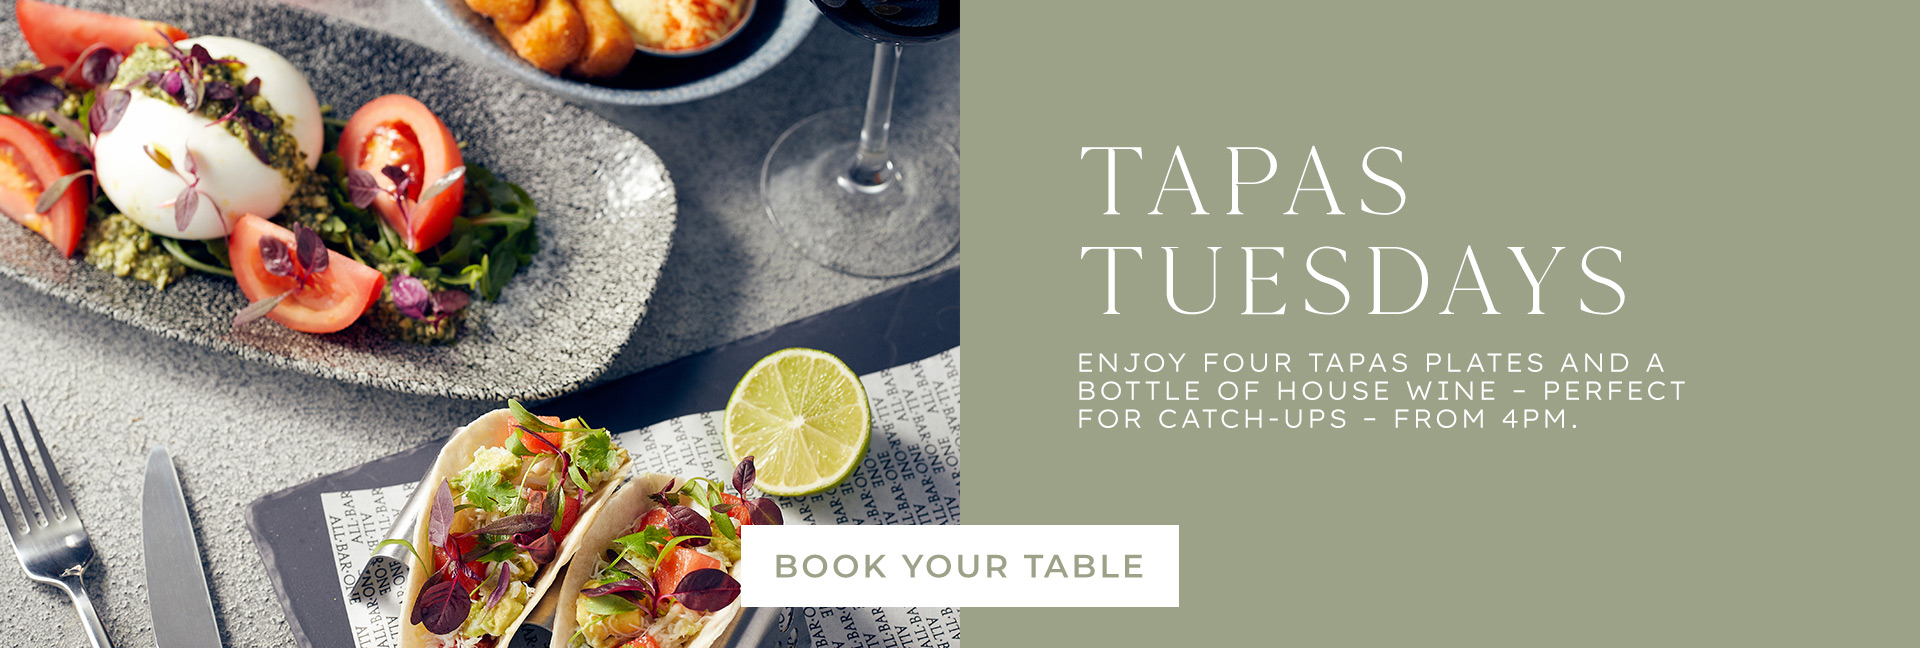 Tapas Tuesday at All Bar One Trafford Centre - Book now